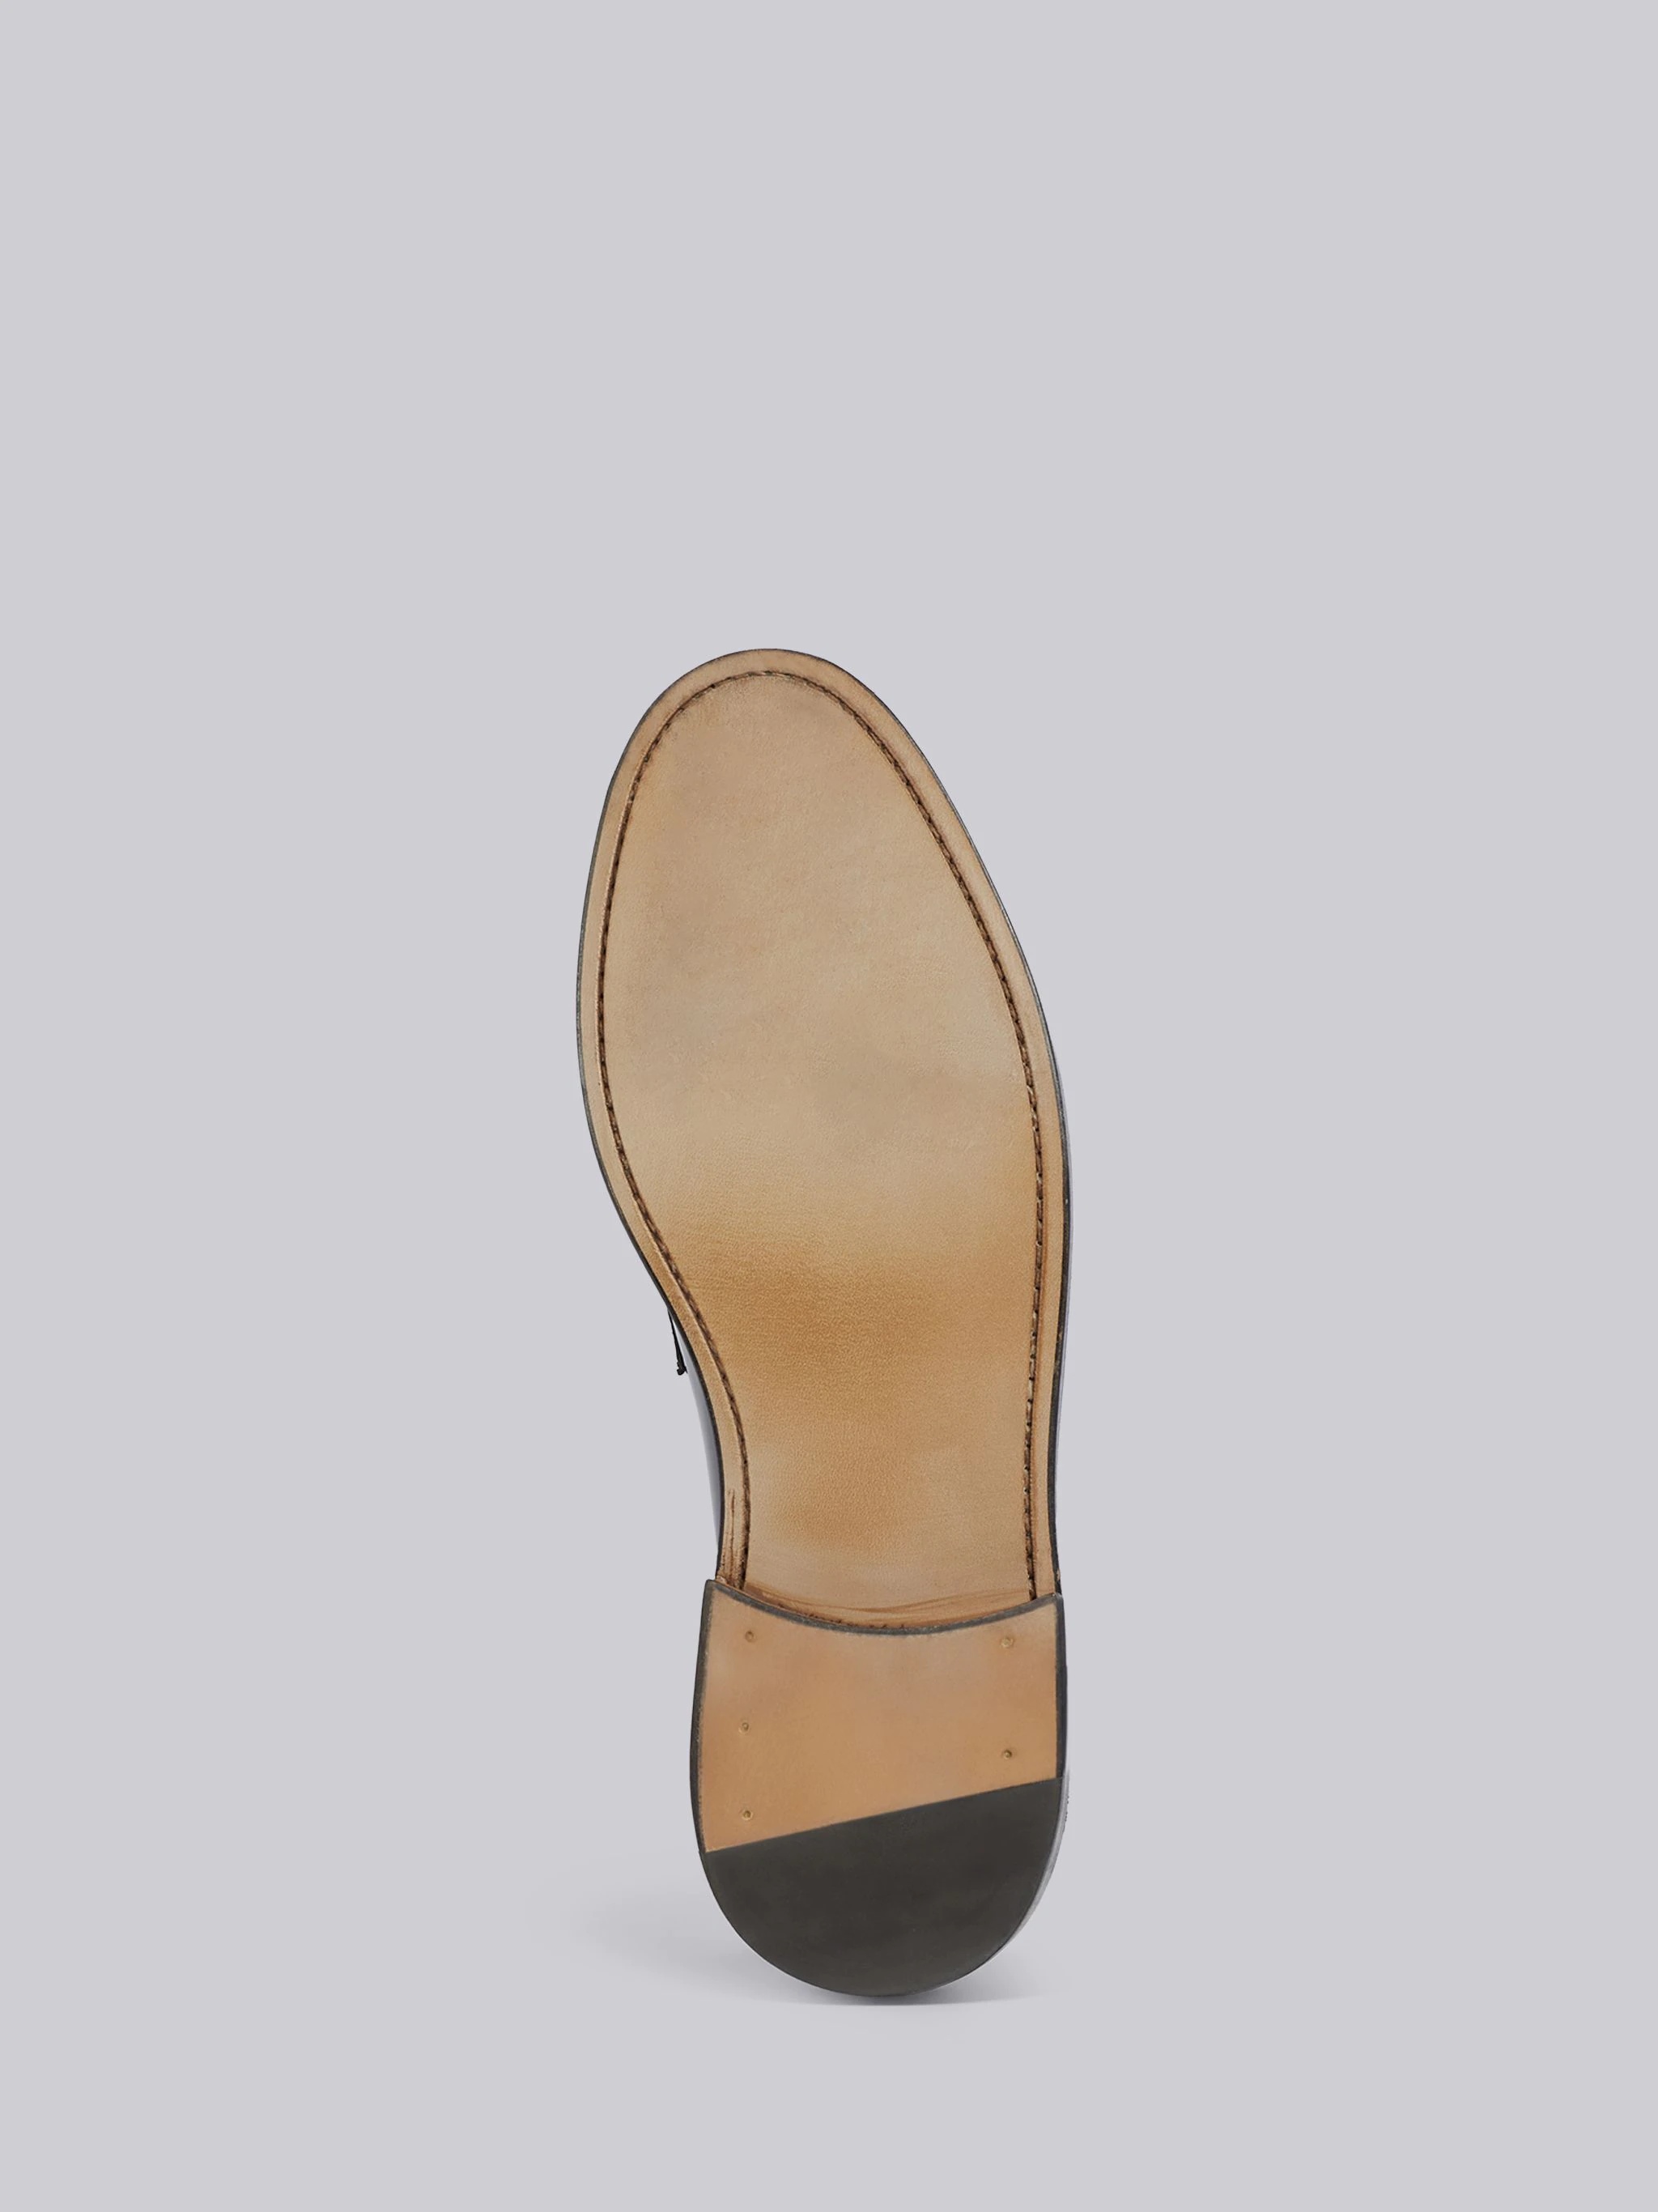 Black Patent Leather Penny Loafer - 5